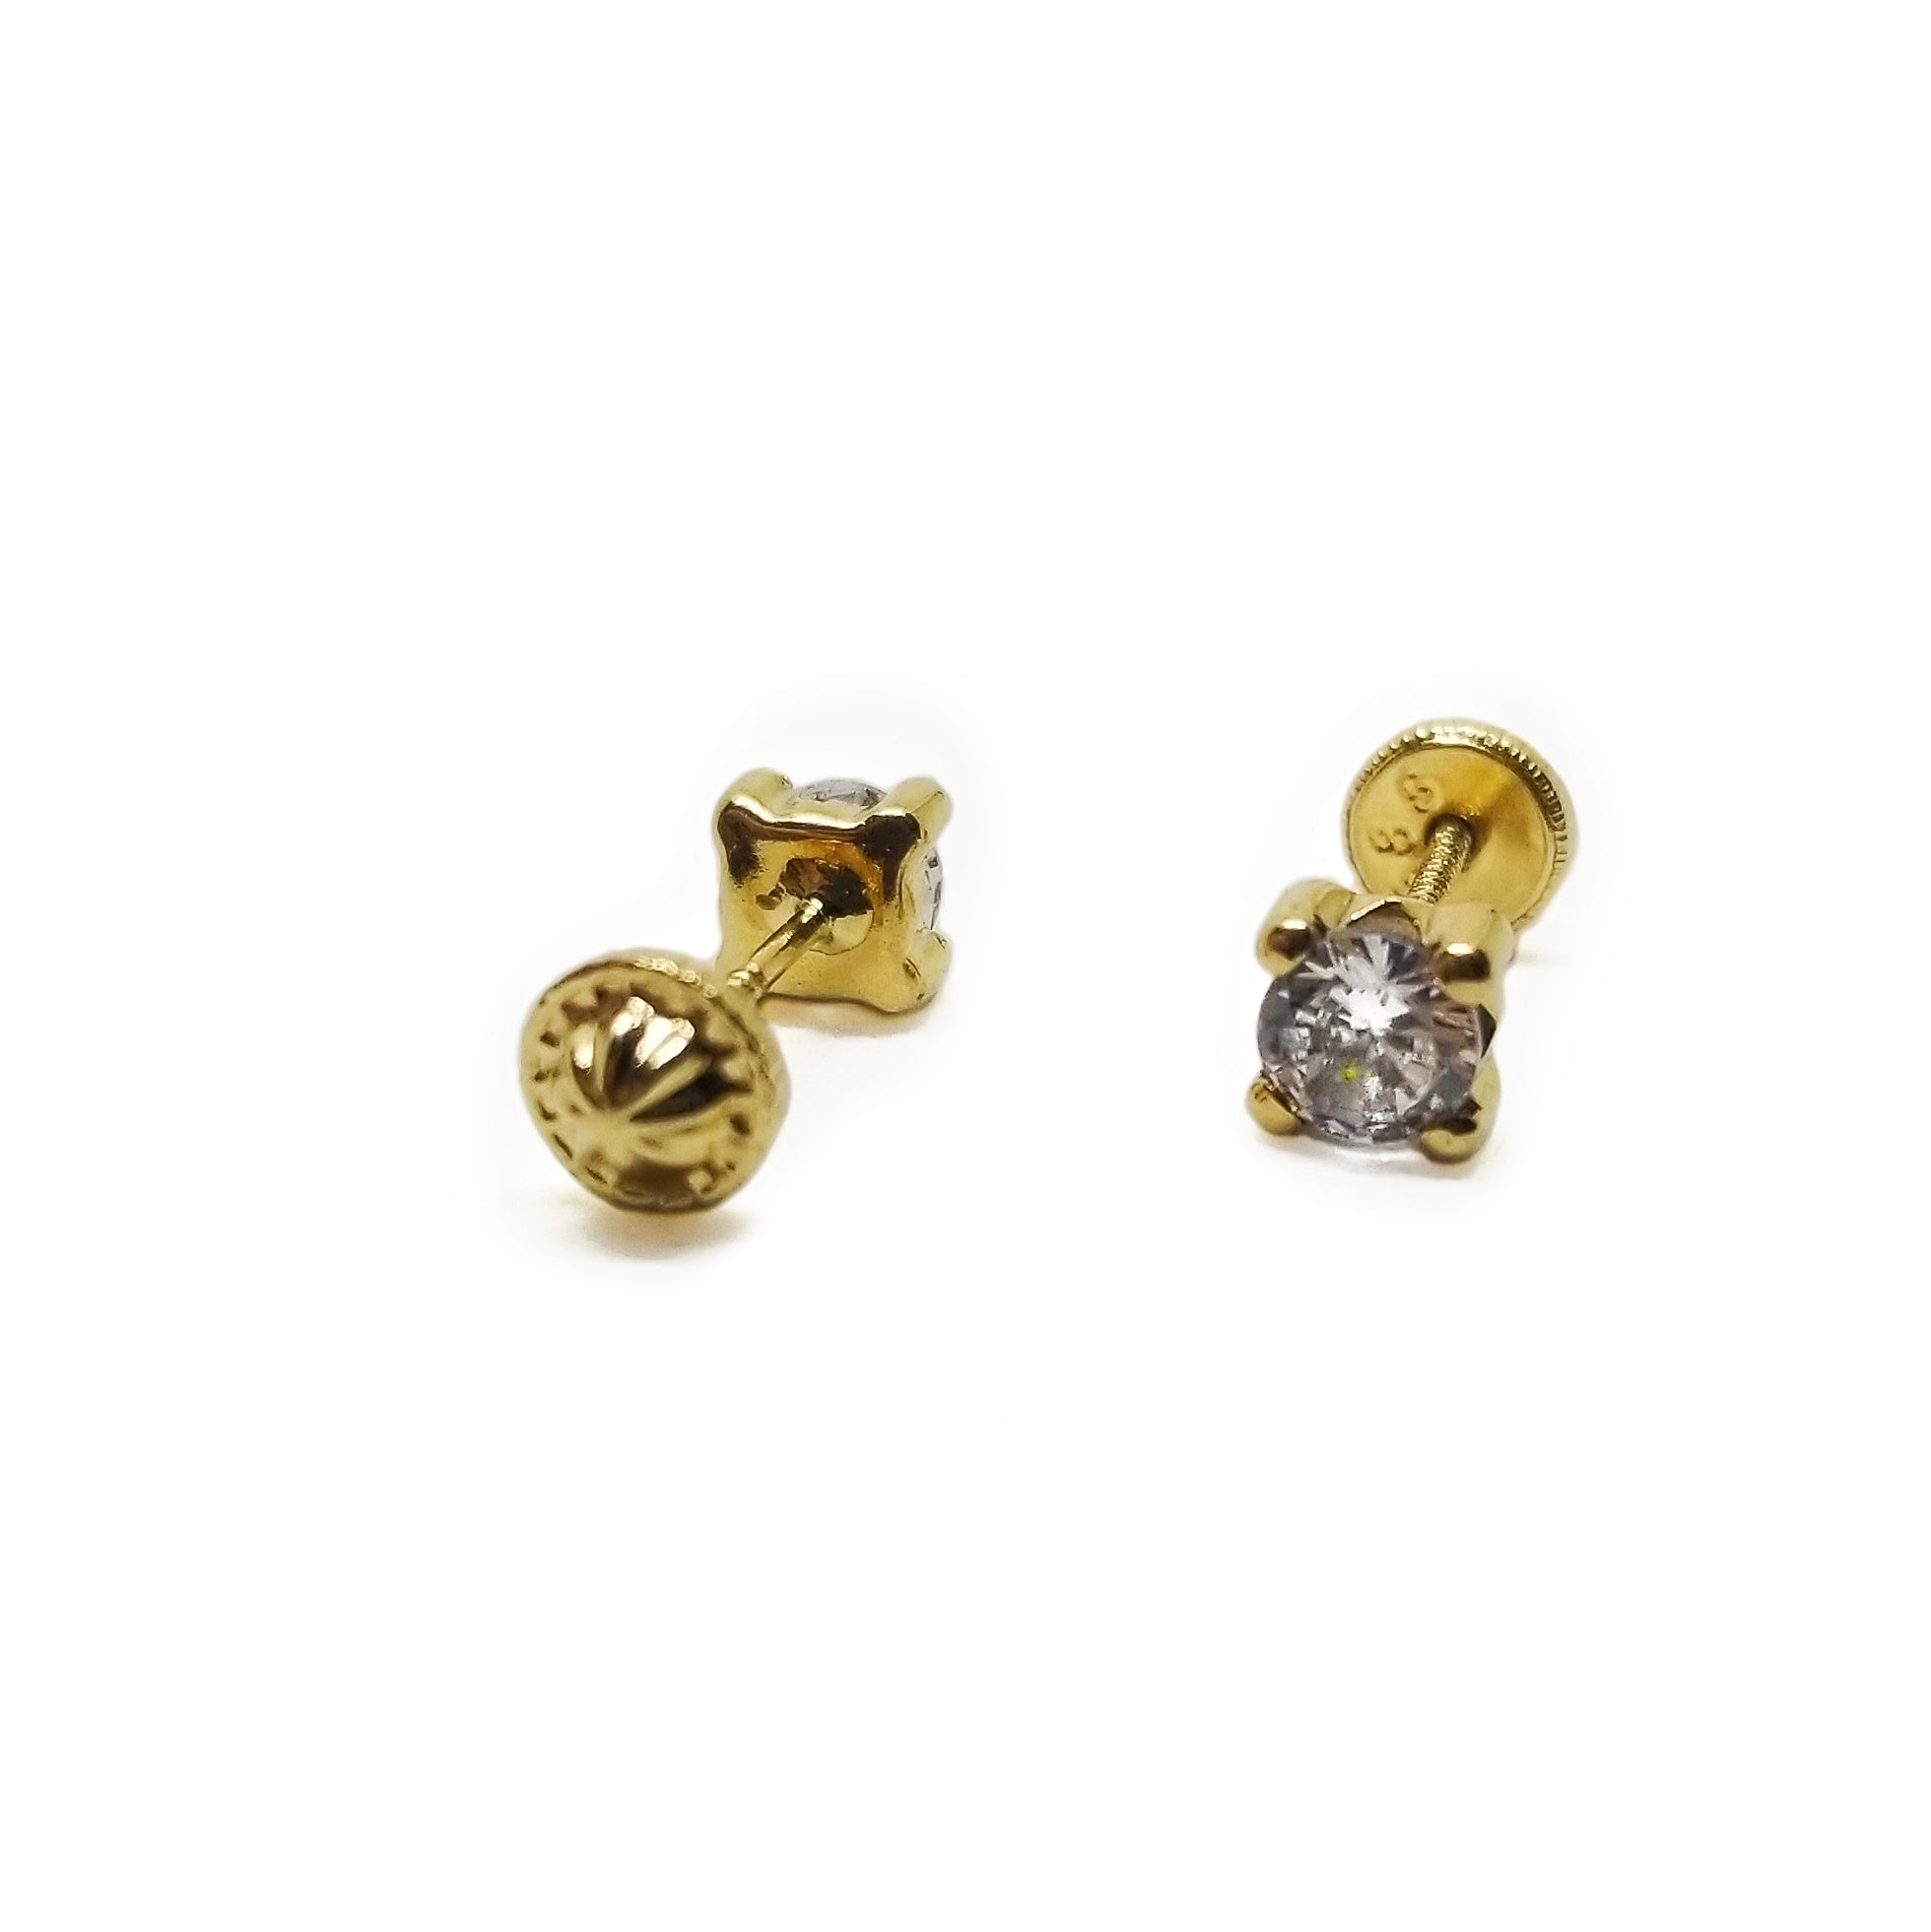 Baby earrings made in 14k gold with white CZ